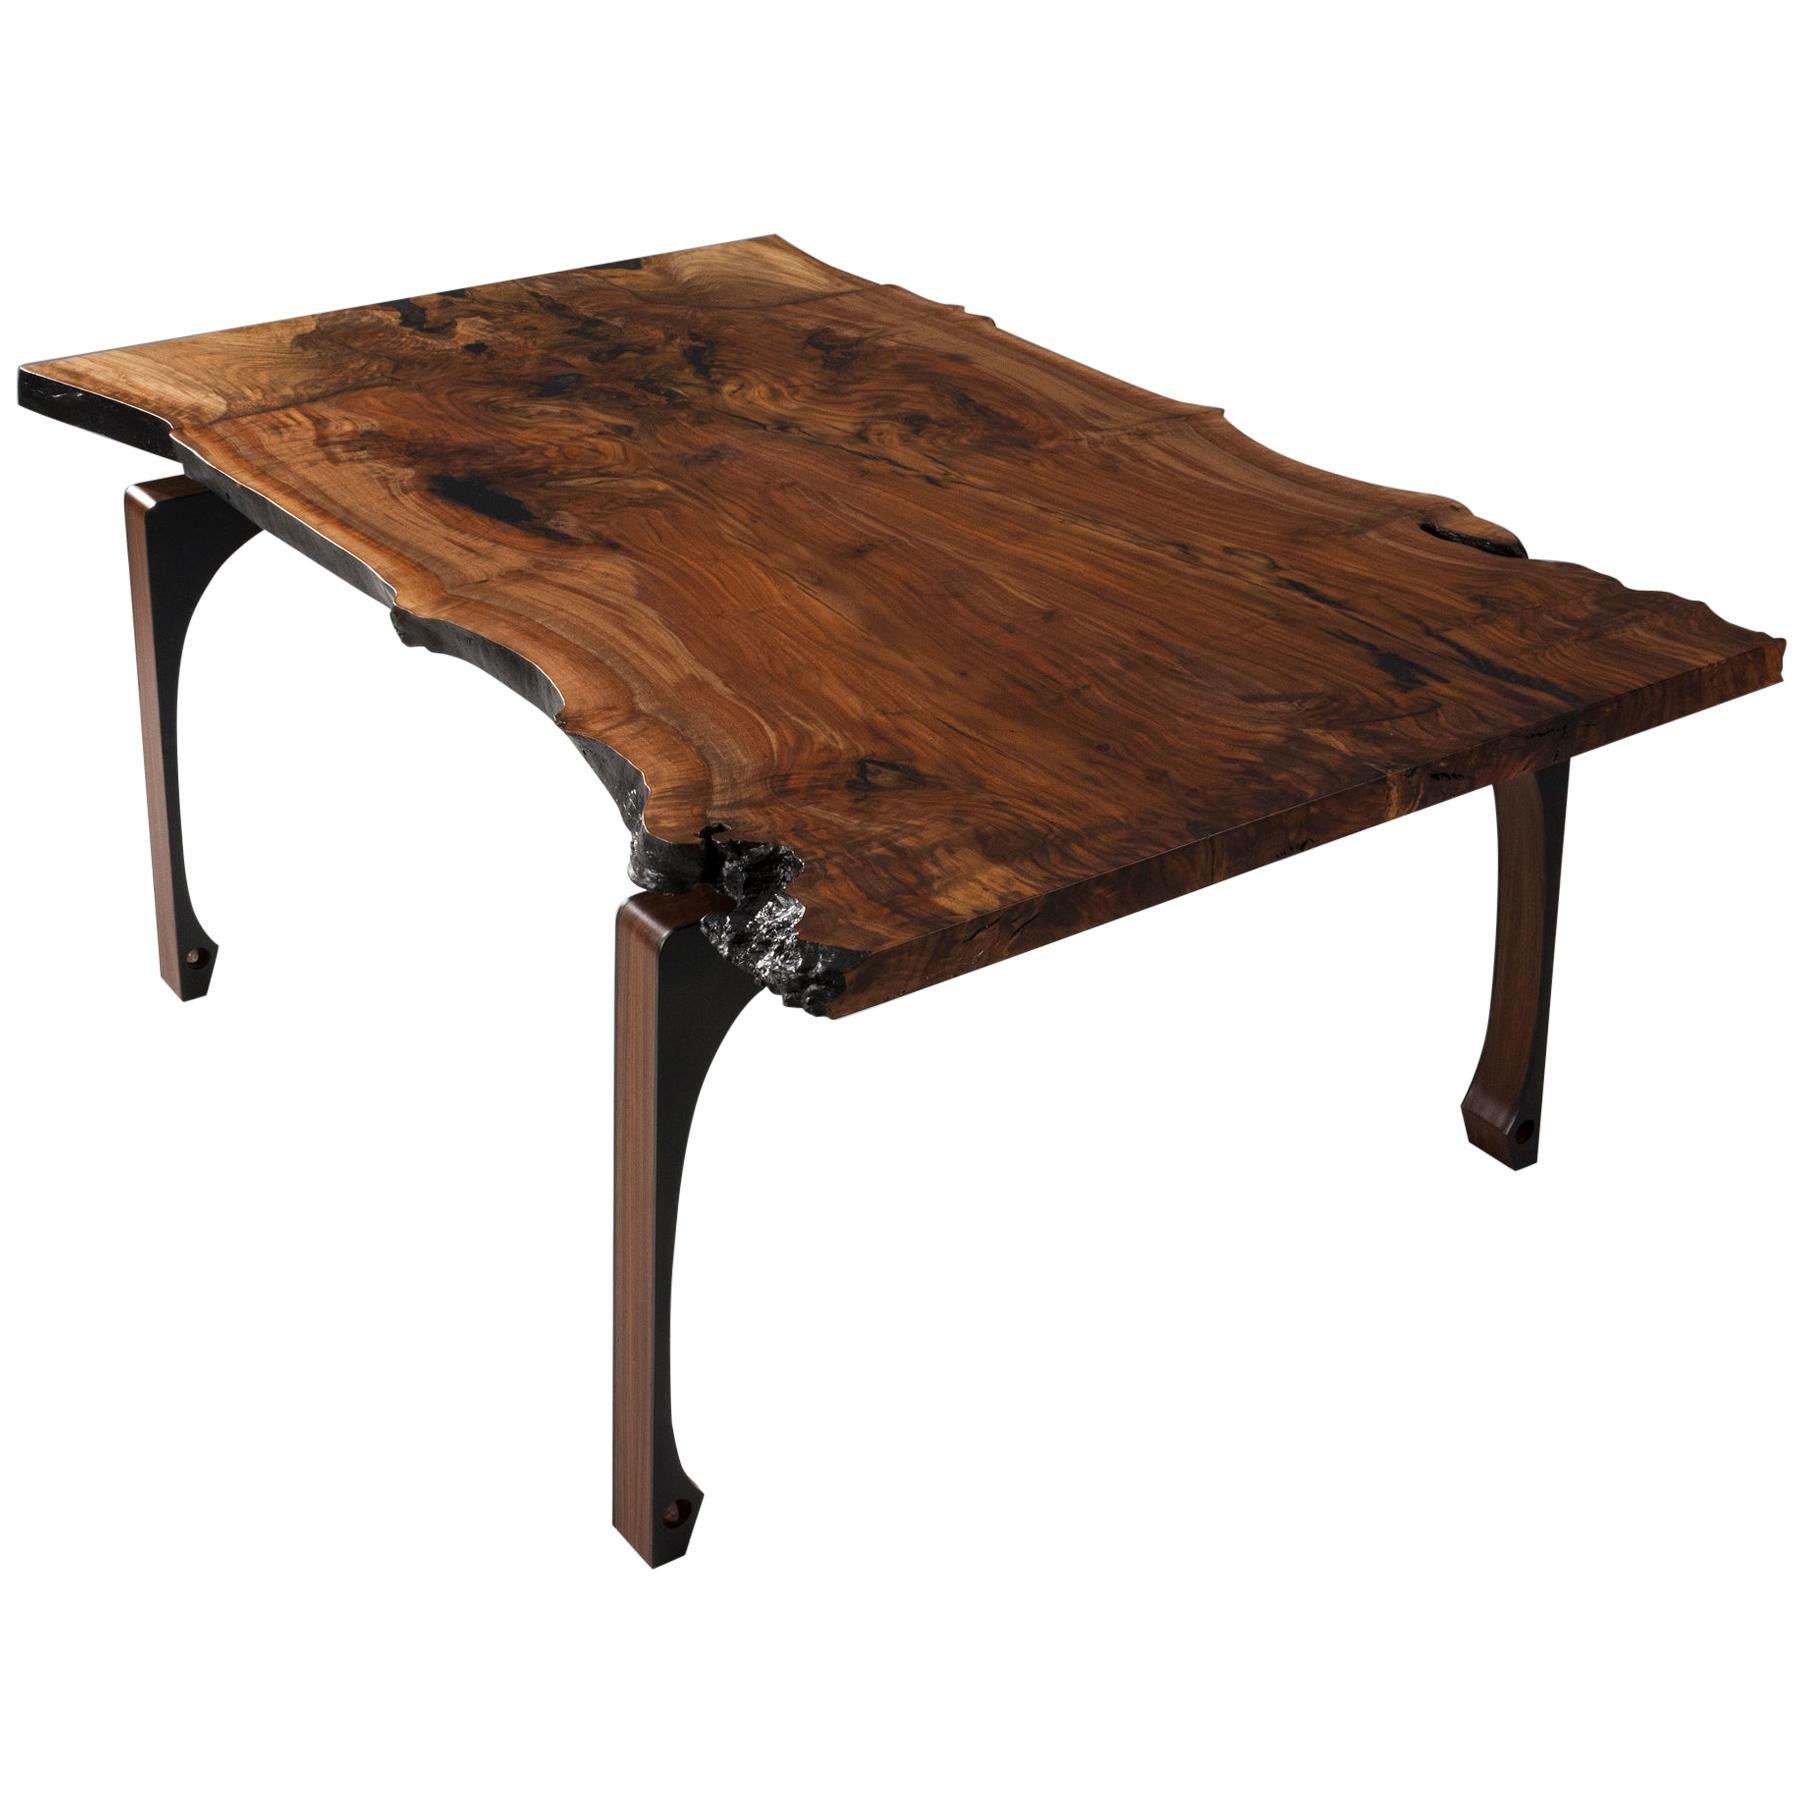 Live Edge Walnut Dining Table with Solid Walnut Legs "Gladstone Dining Table"